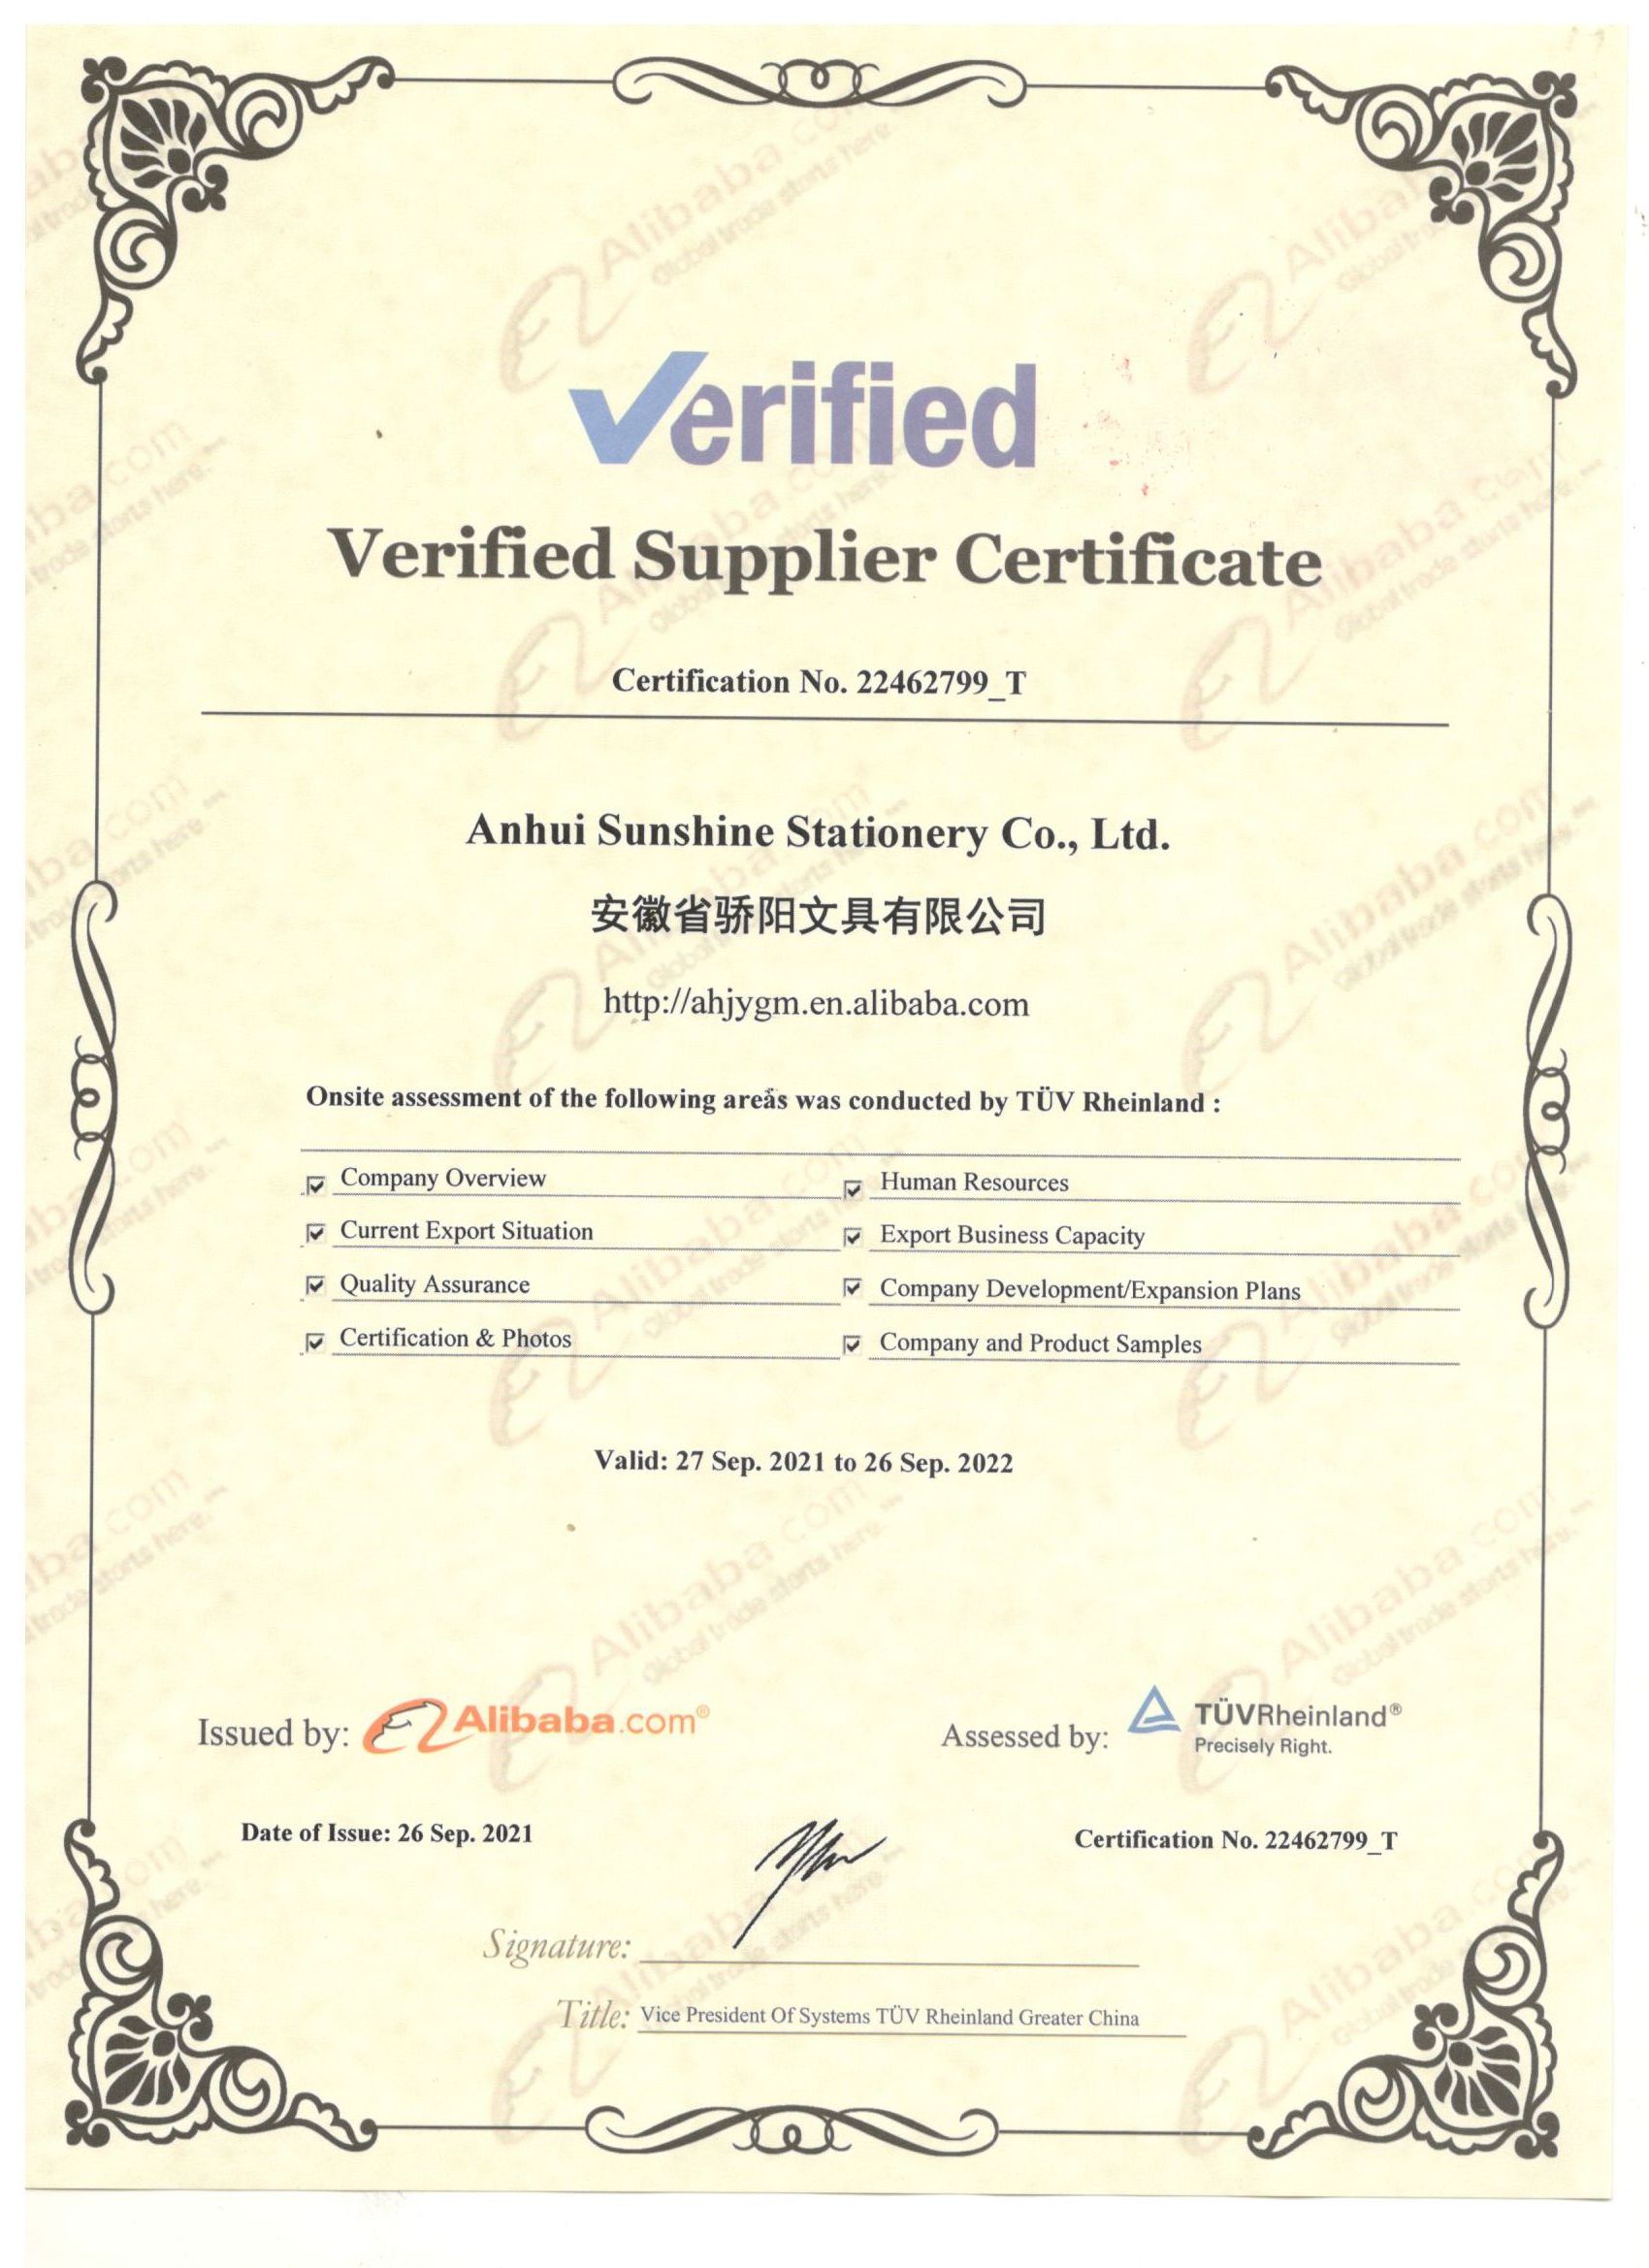 Verified Supplier Certificate by TUV